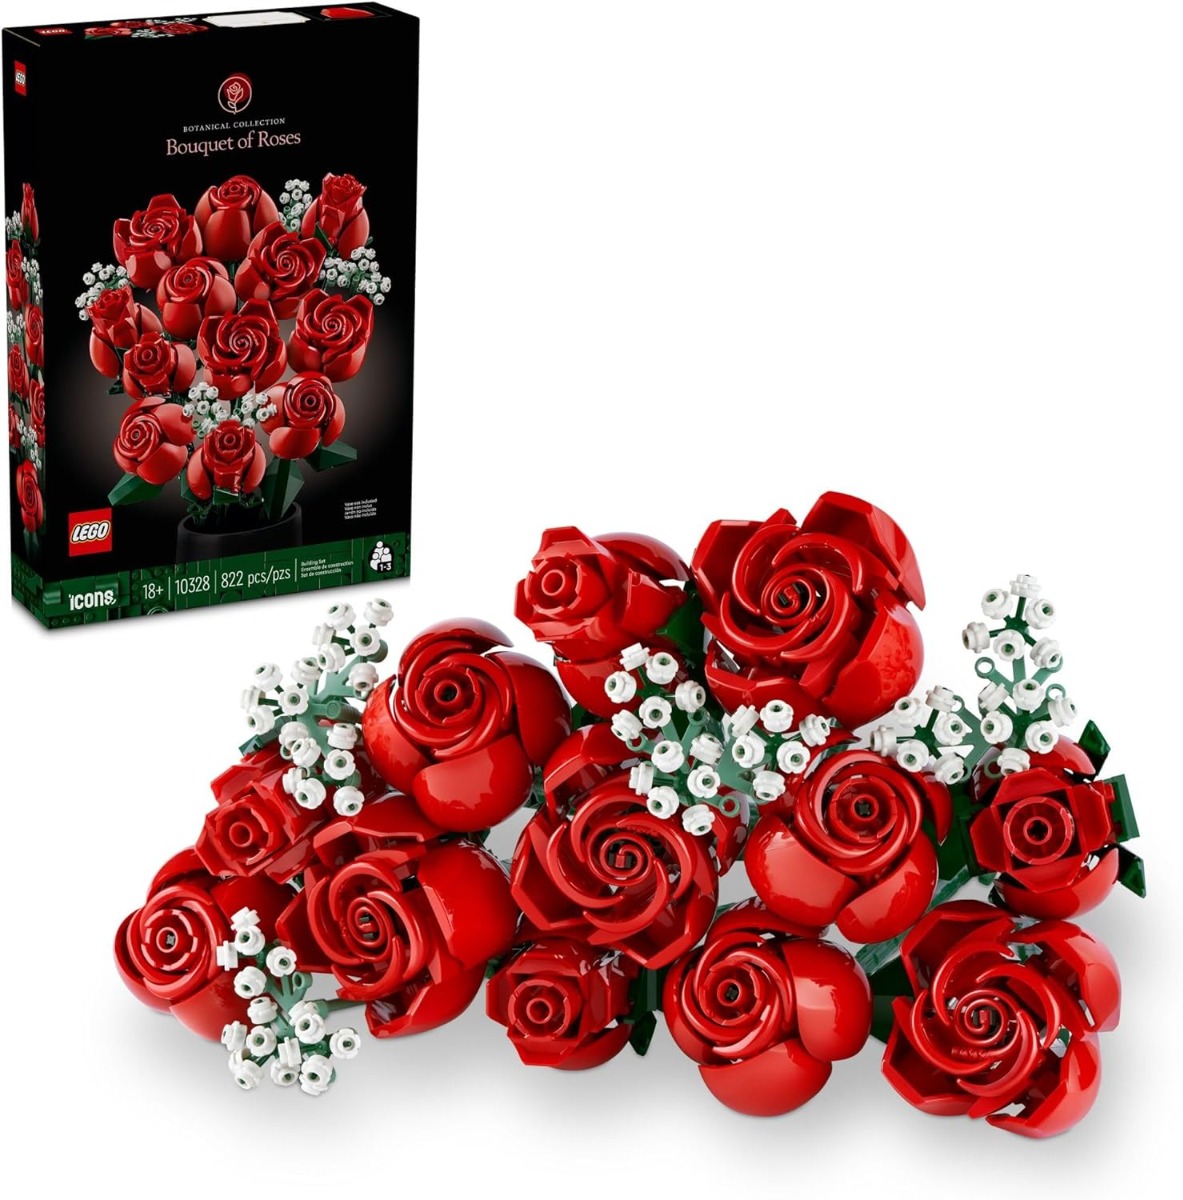 LEGO Botanical Collection Bouquet of Roses (10328) OPEN BOX